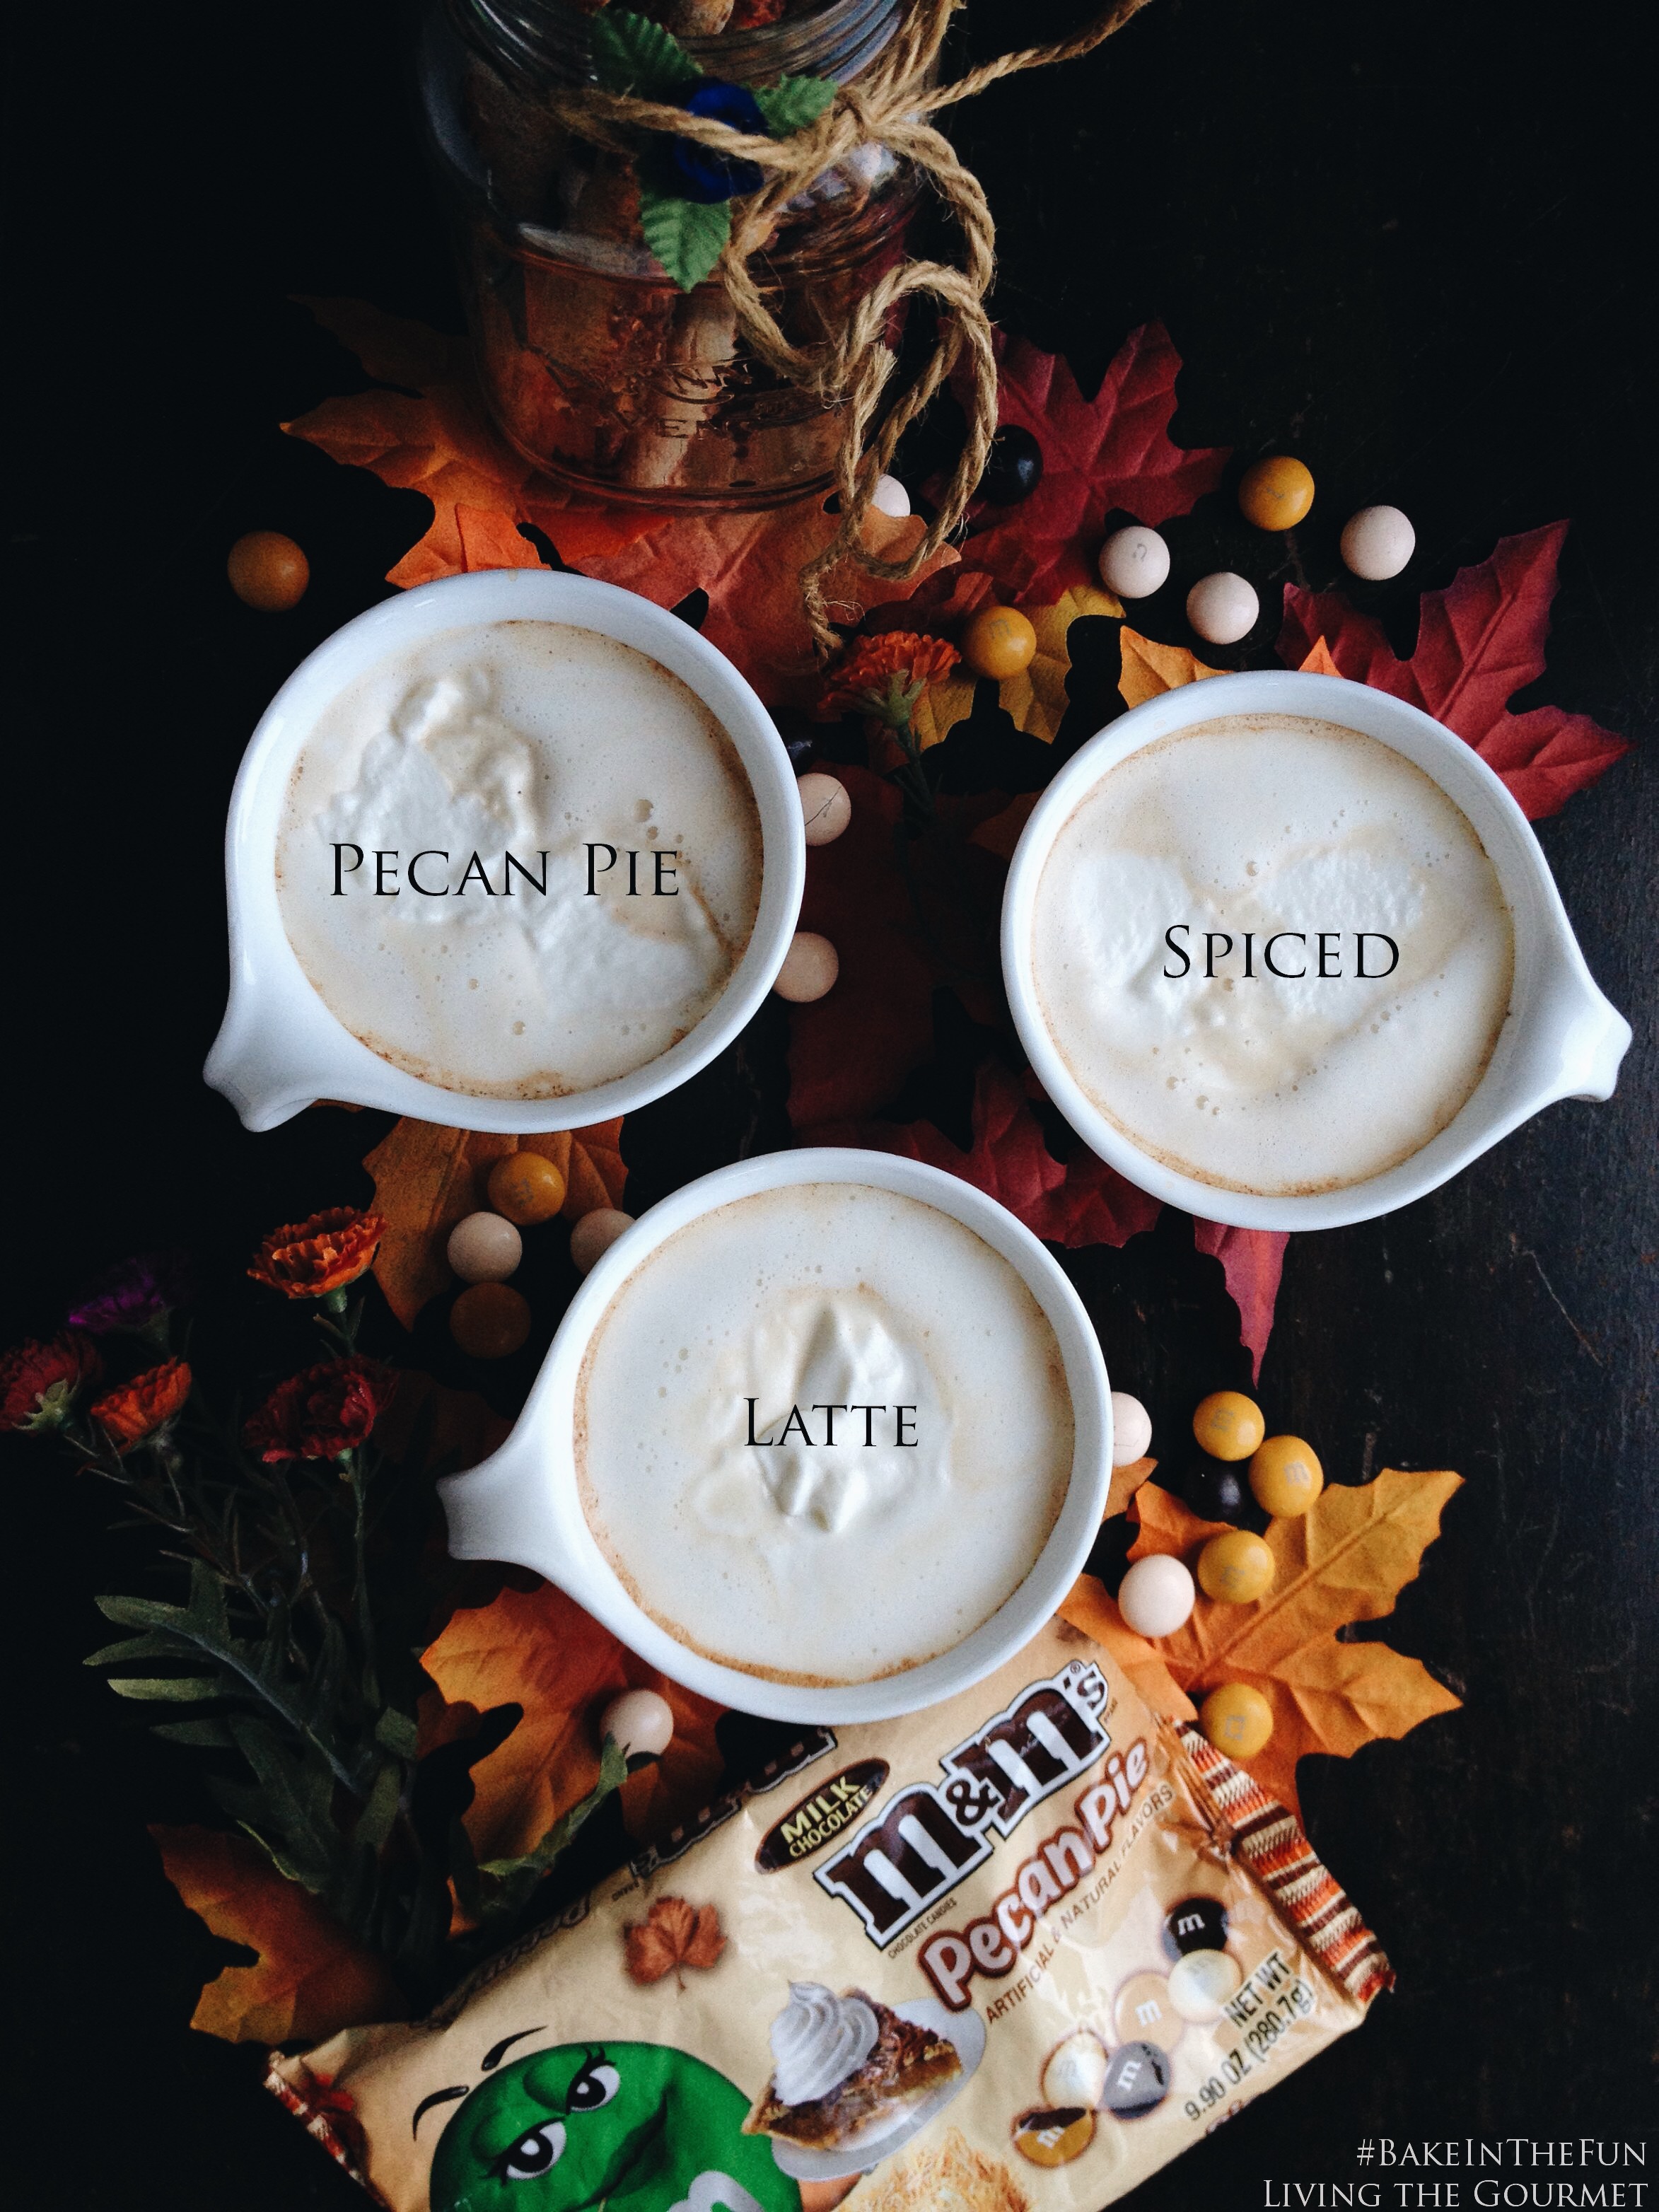 Living the Gourmet: Pecan Pie Spiced Latte with Harvest Stick Cookies | #BakeInTheFun #ad